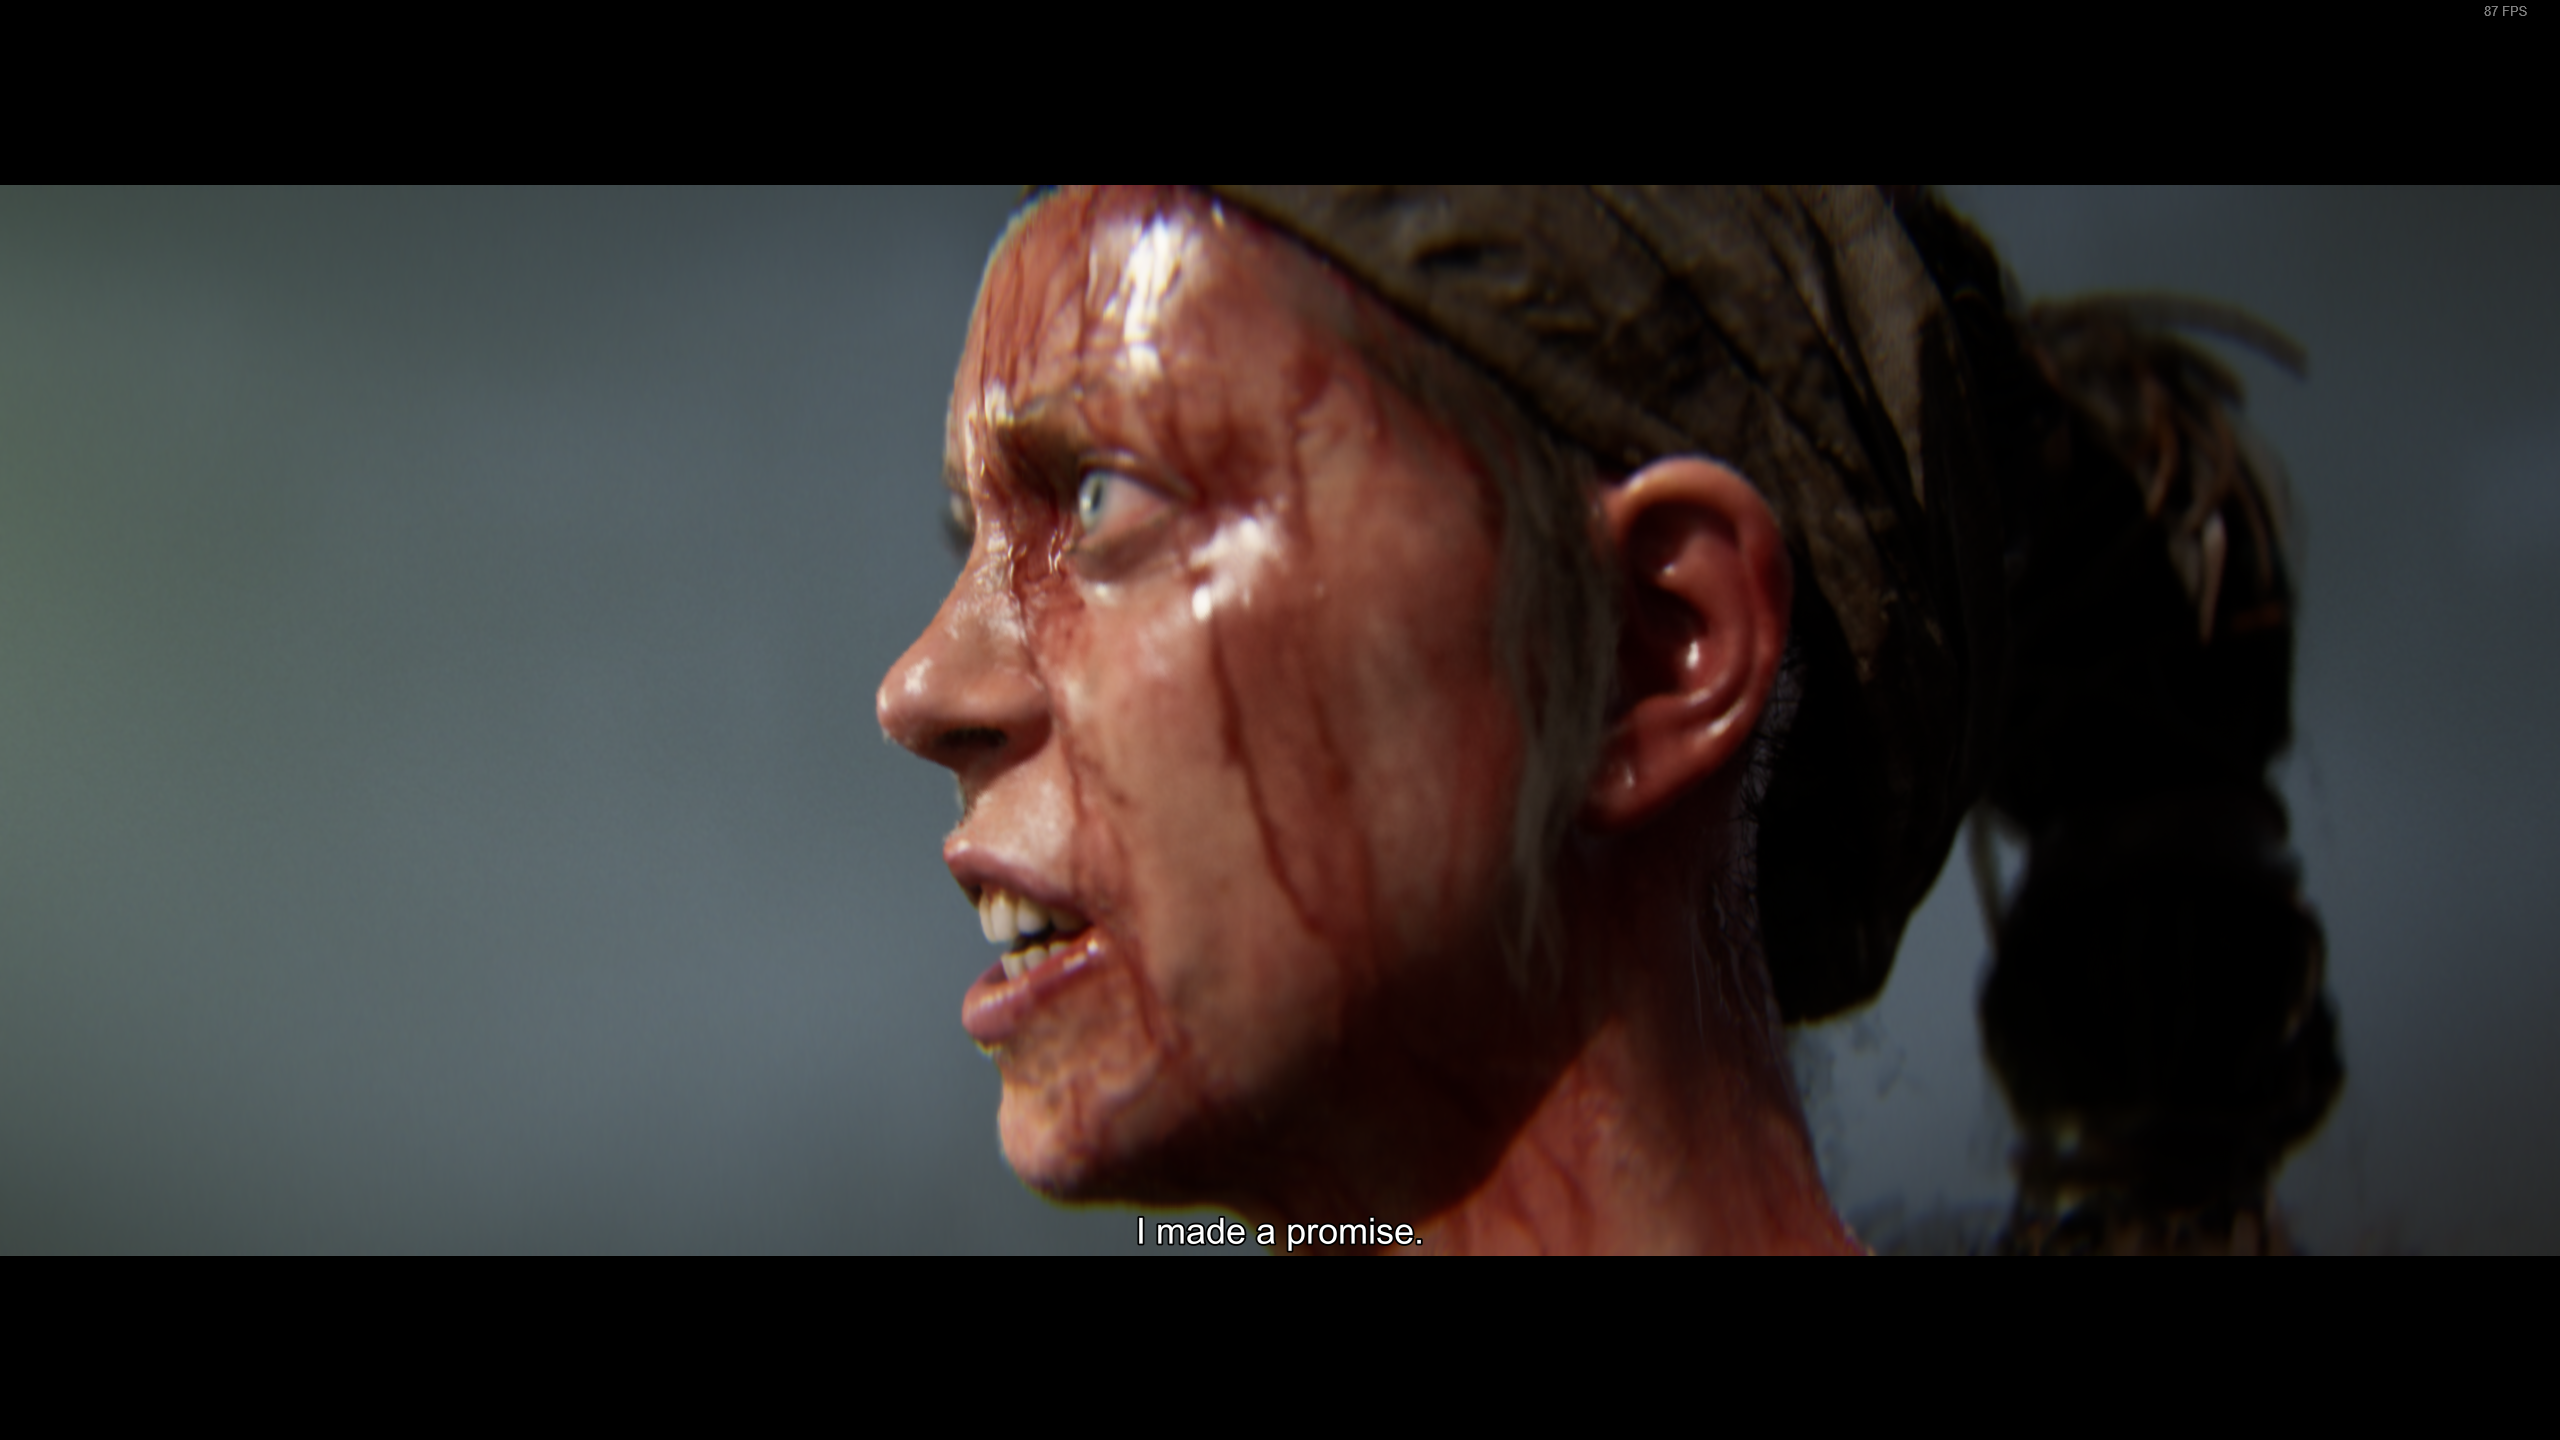 Senua, shown from the side in a big ol' rage